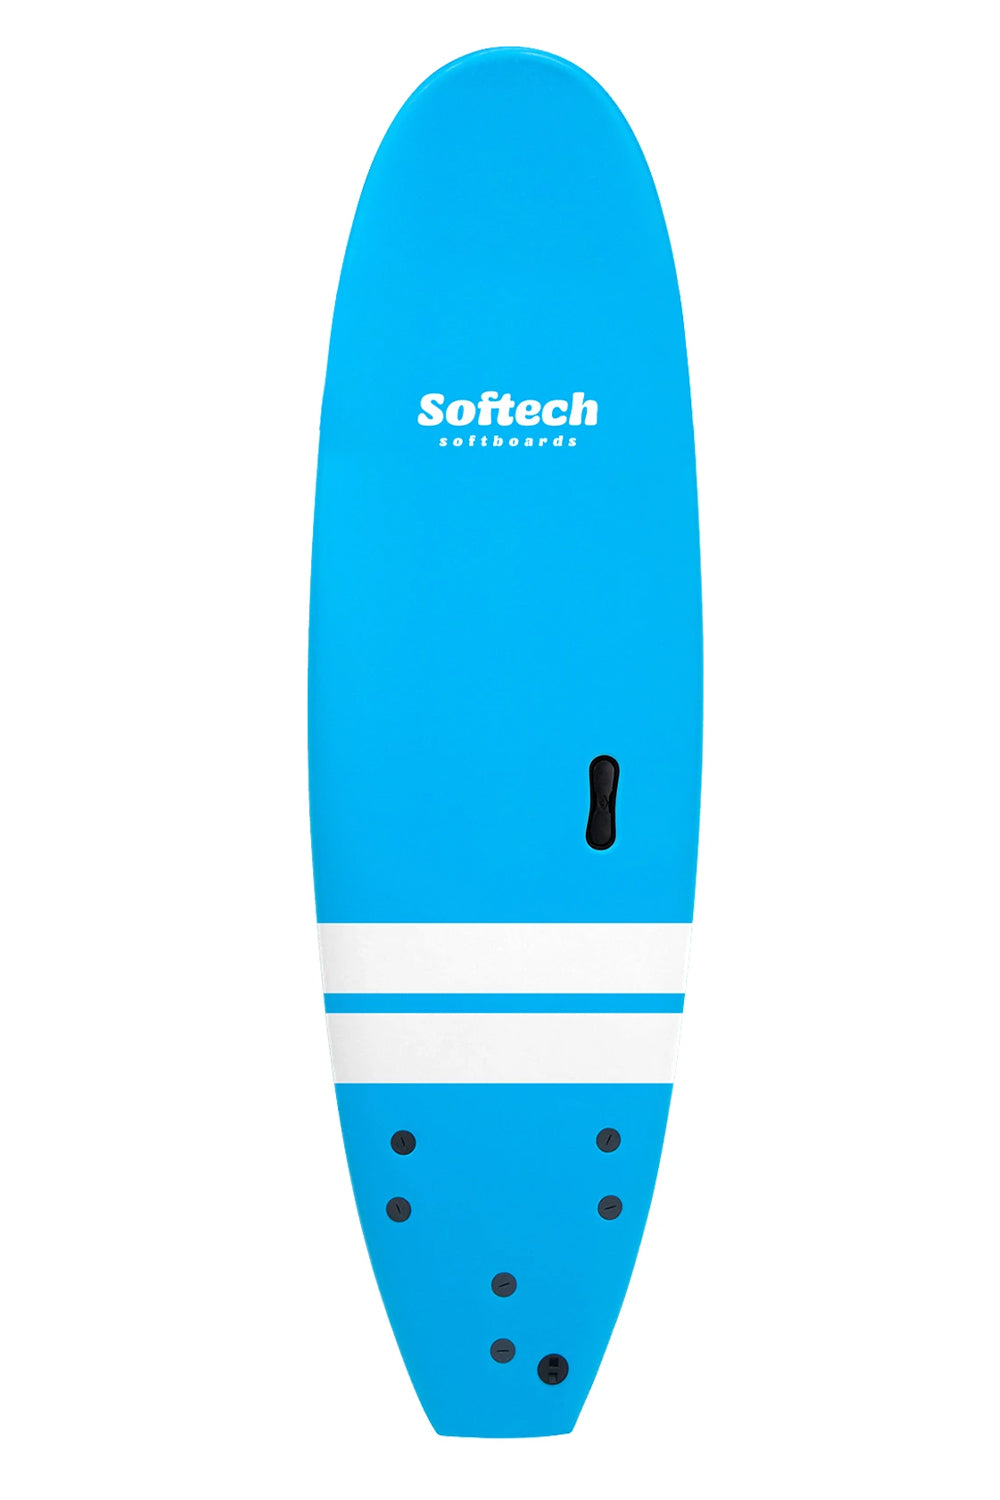 7'6 Softech Roller 2022 Softboard - Comes with fins